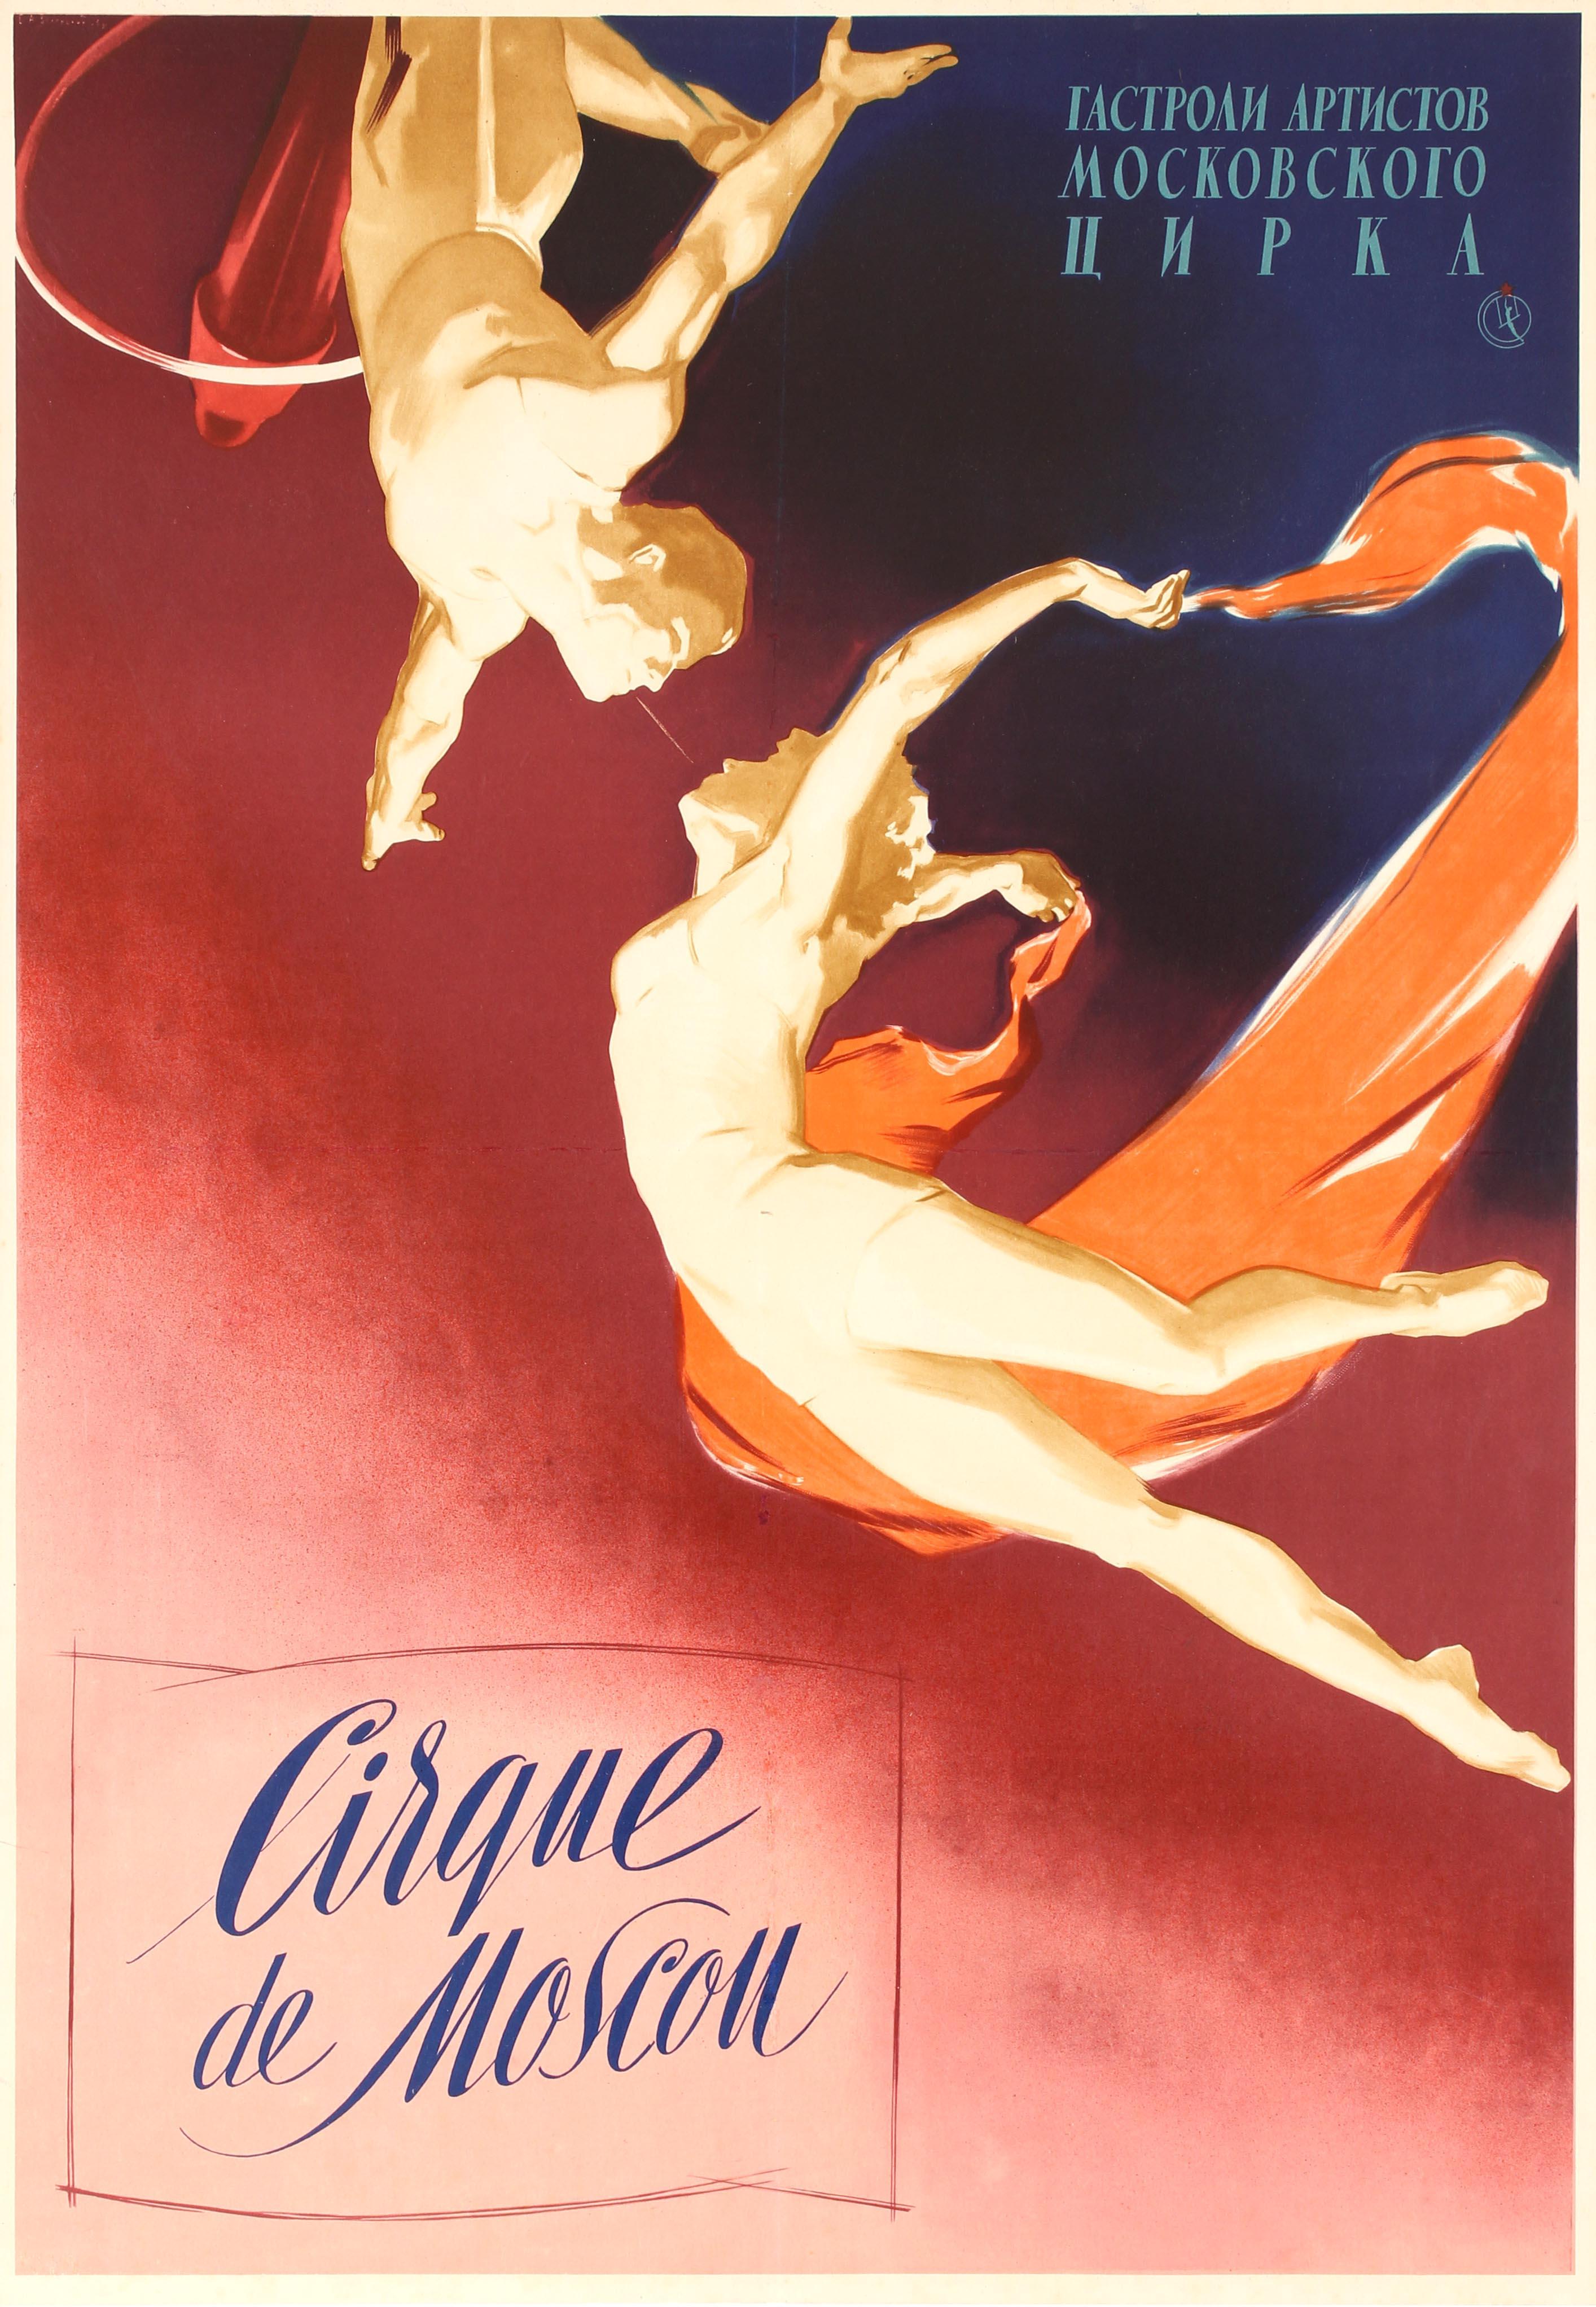 Unknown Print - Original Vintage Moscow Circus Poster Russian Aerial Trapeze Acrobats Cirque Act